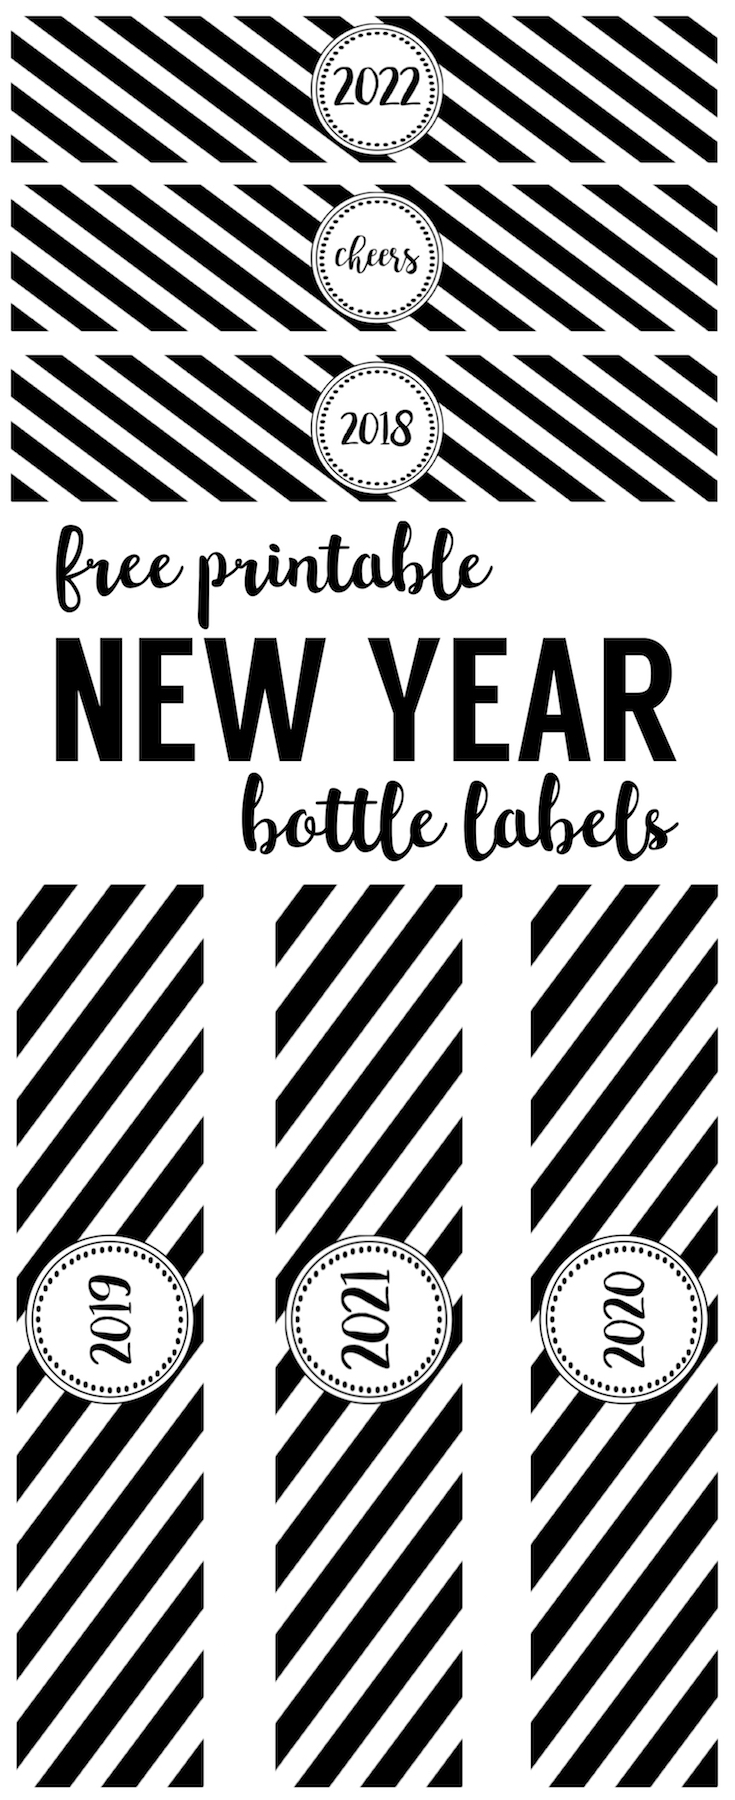 New Year Bottle Labels Free Printable. Print these water bottle wrappers for your New Year's Eve party for some cute New Year decor.